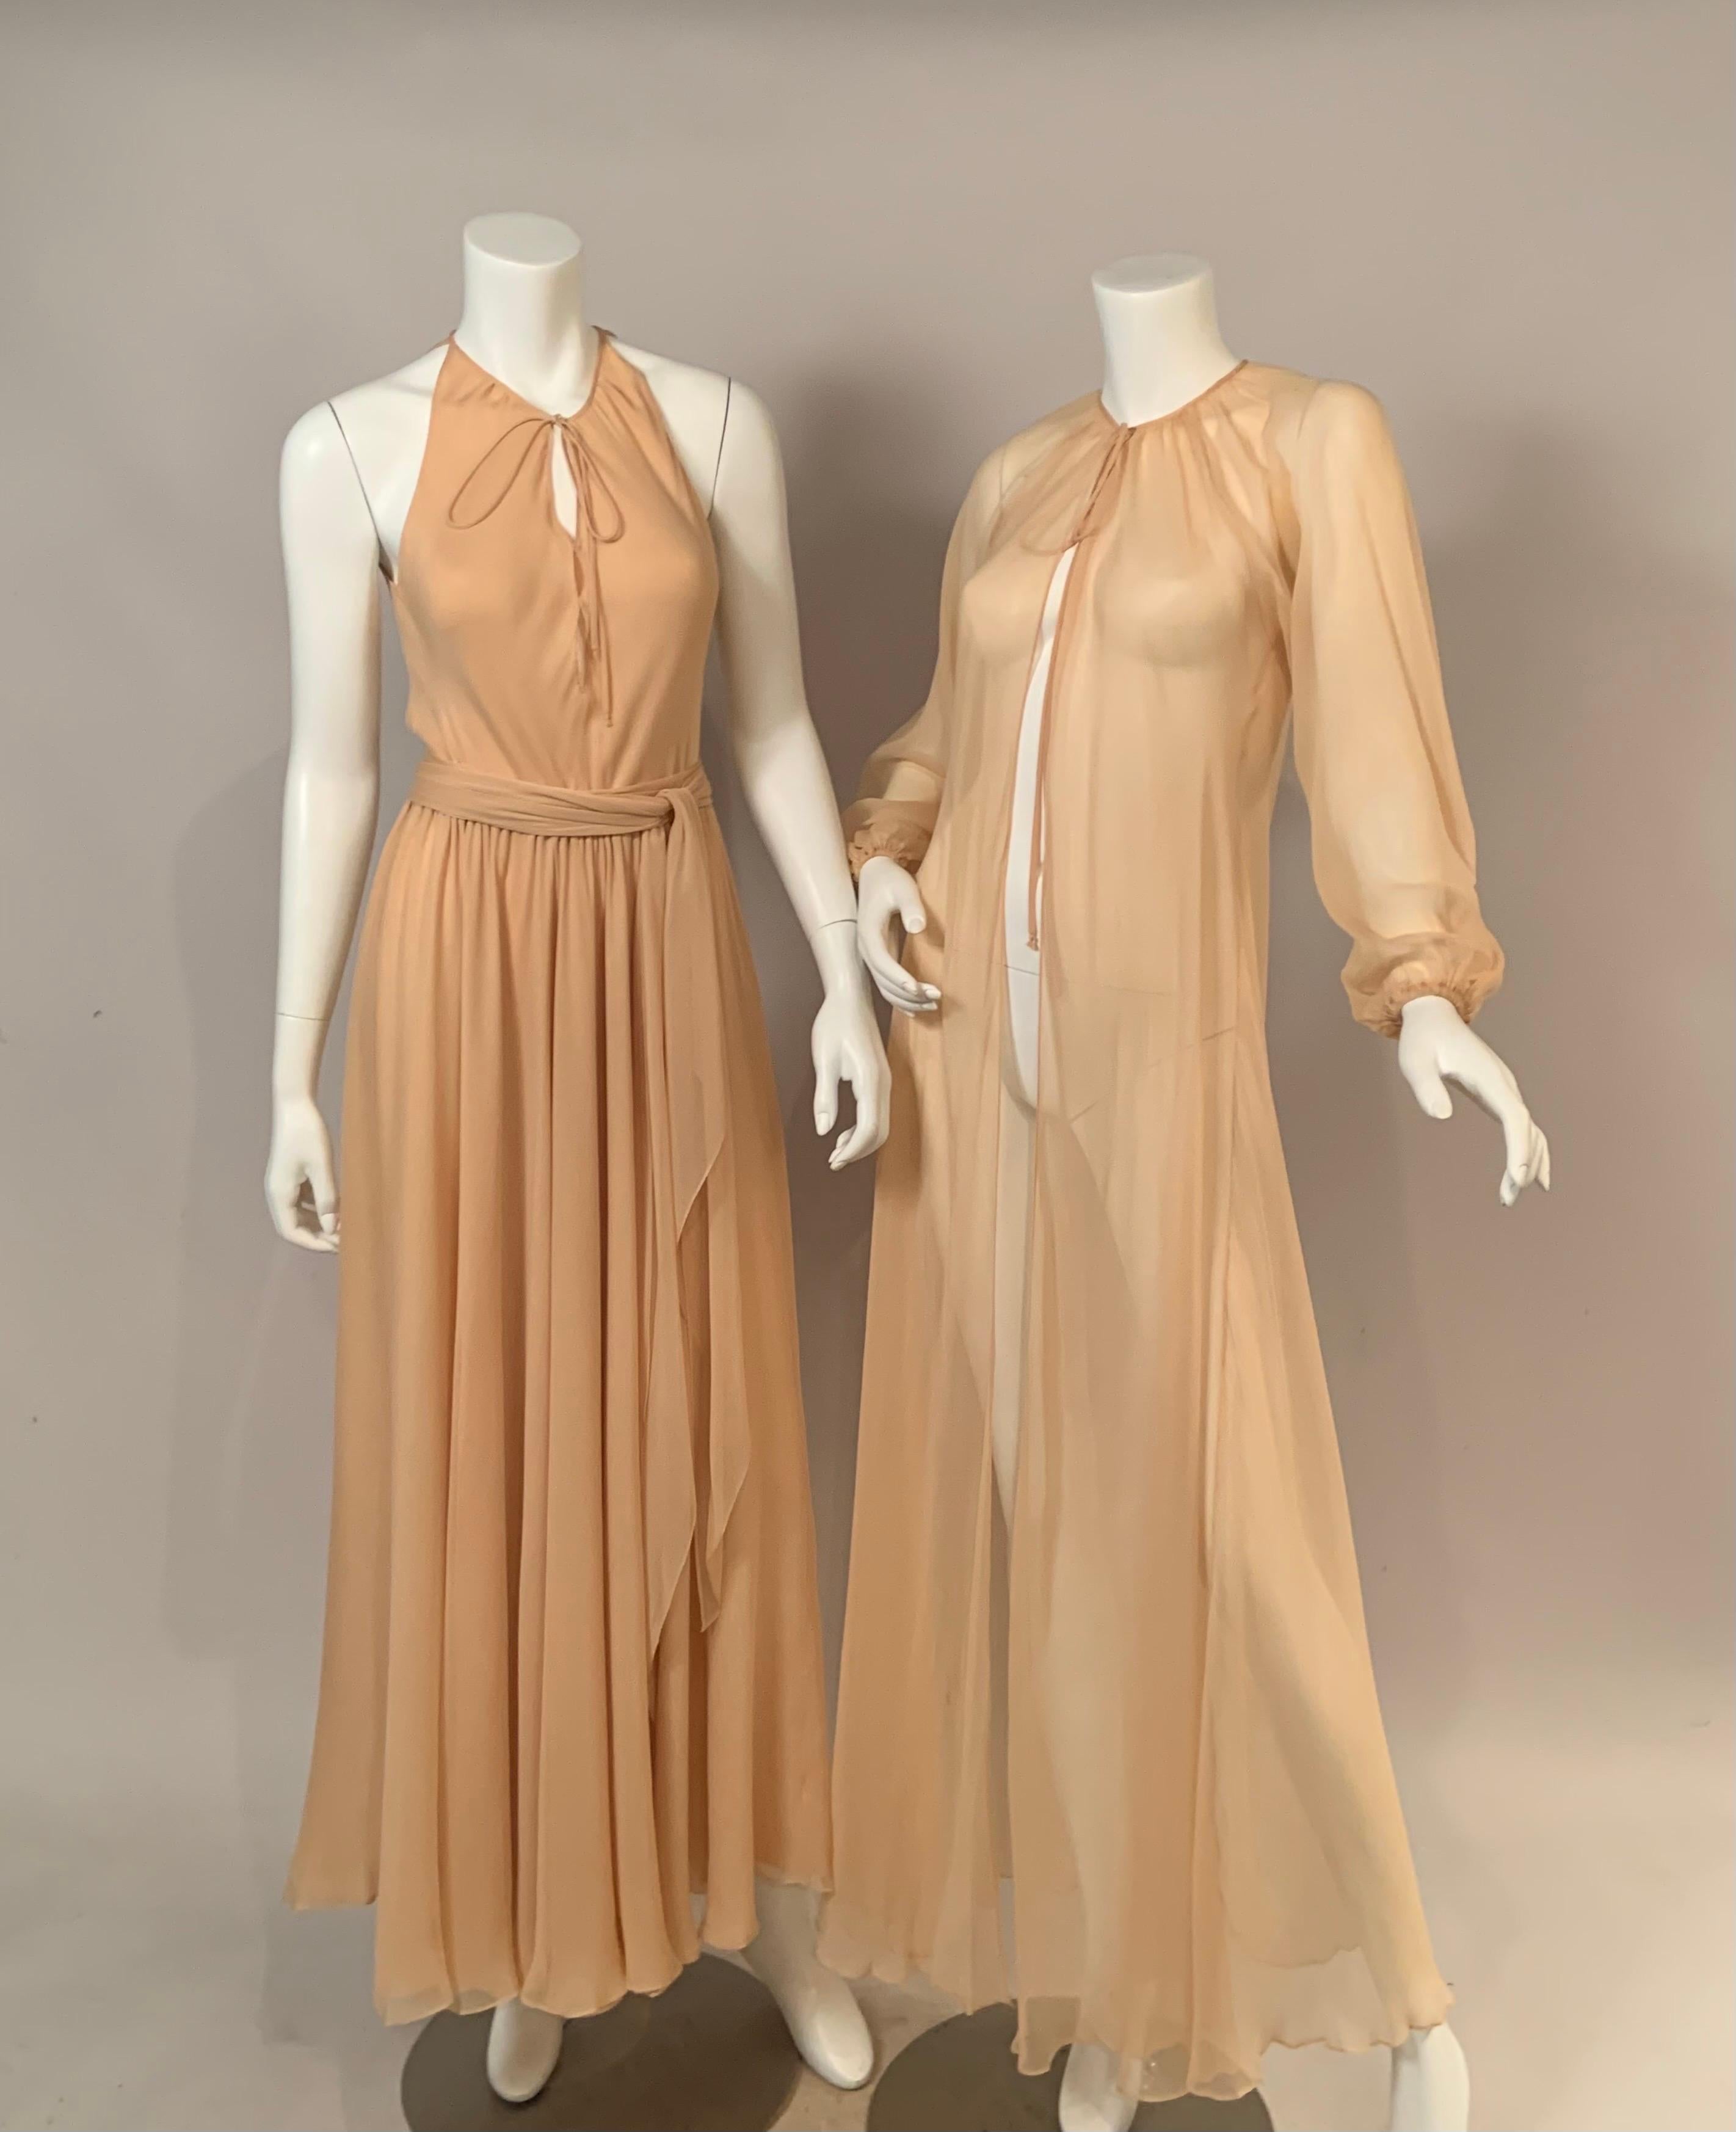 This stunning three piece outfit was designed by Halston in the late 1970's or early 1980's.  The dress is three layers of feather light silk chiffon, there is an optional tie at the neckline, three hooks and eyes below, and an elasticized